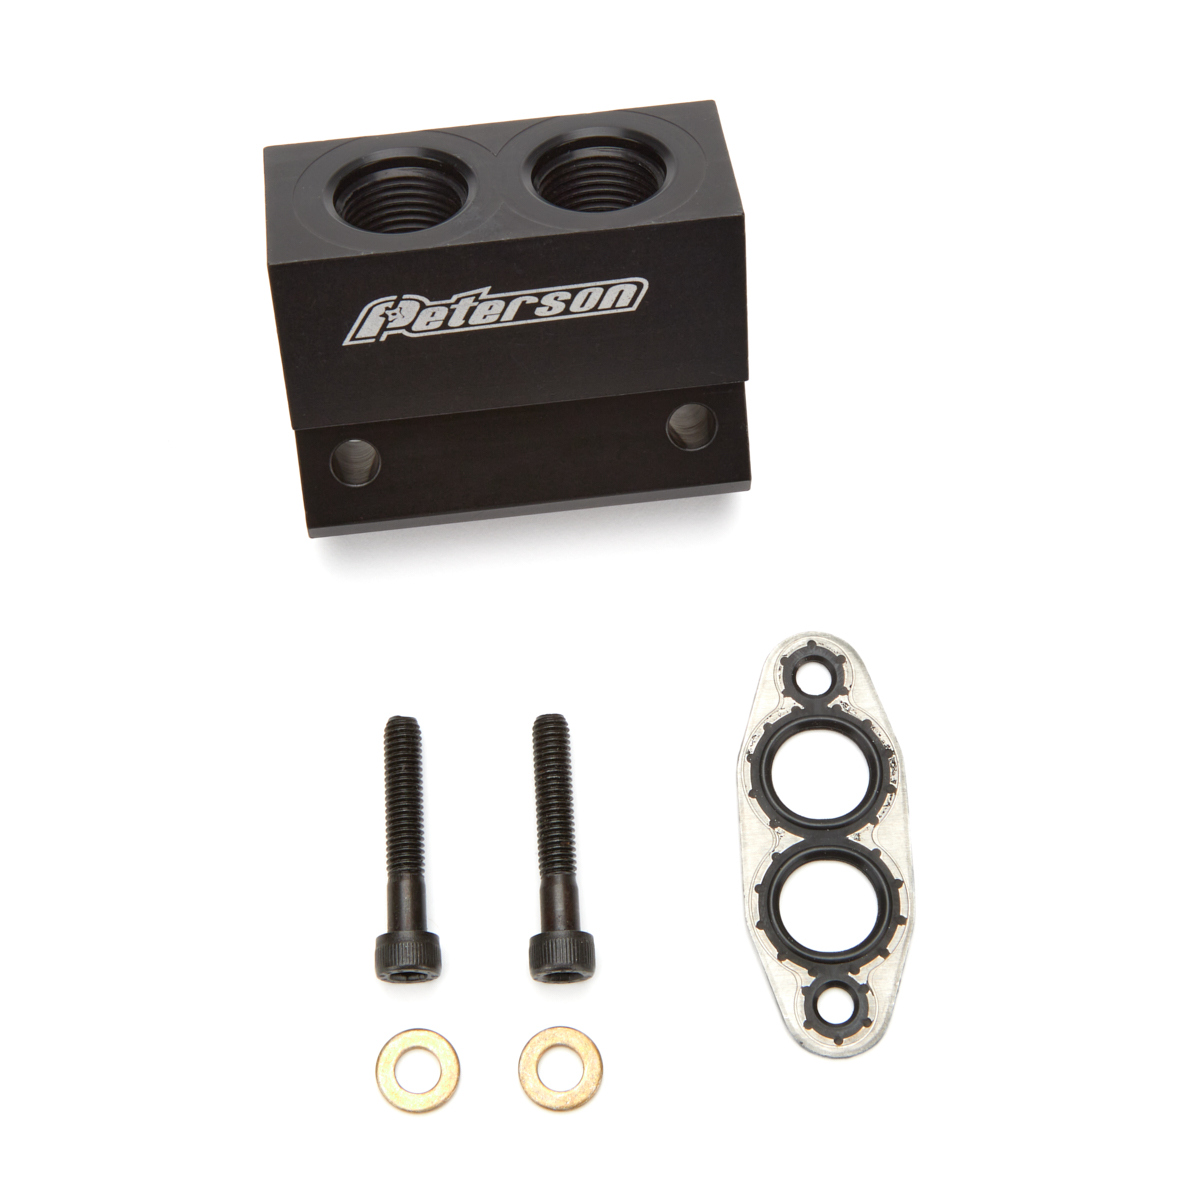 Peterson Fluid 15-5011 Oil Cooler Adapter, 8 AN Female Inlet, 8 AN Female Outlet, Aluminum, Black Anodized, GM LS-Series, Each